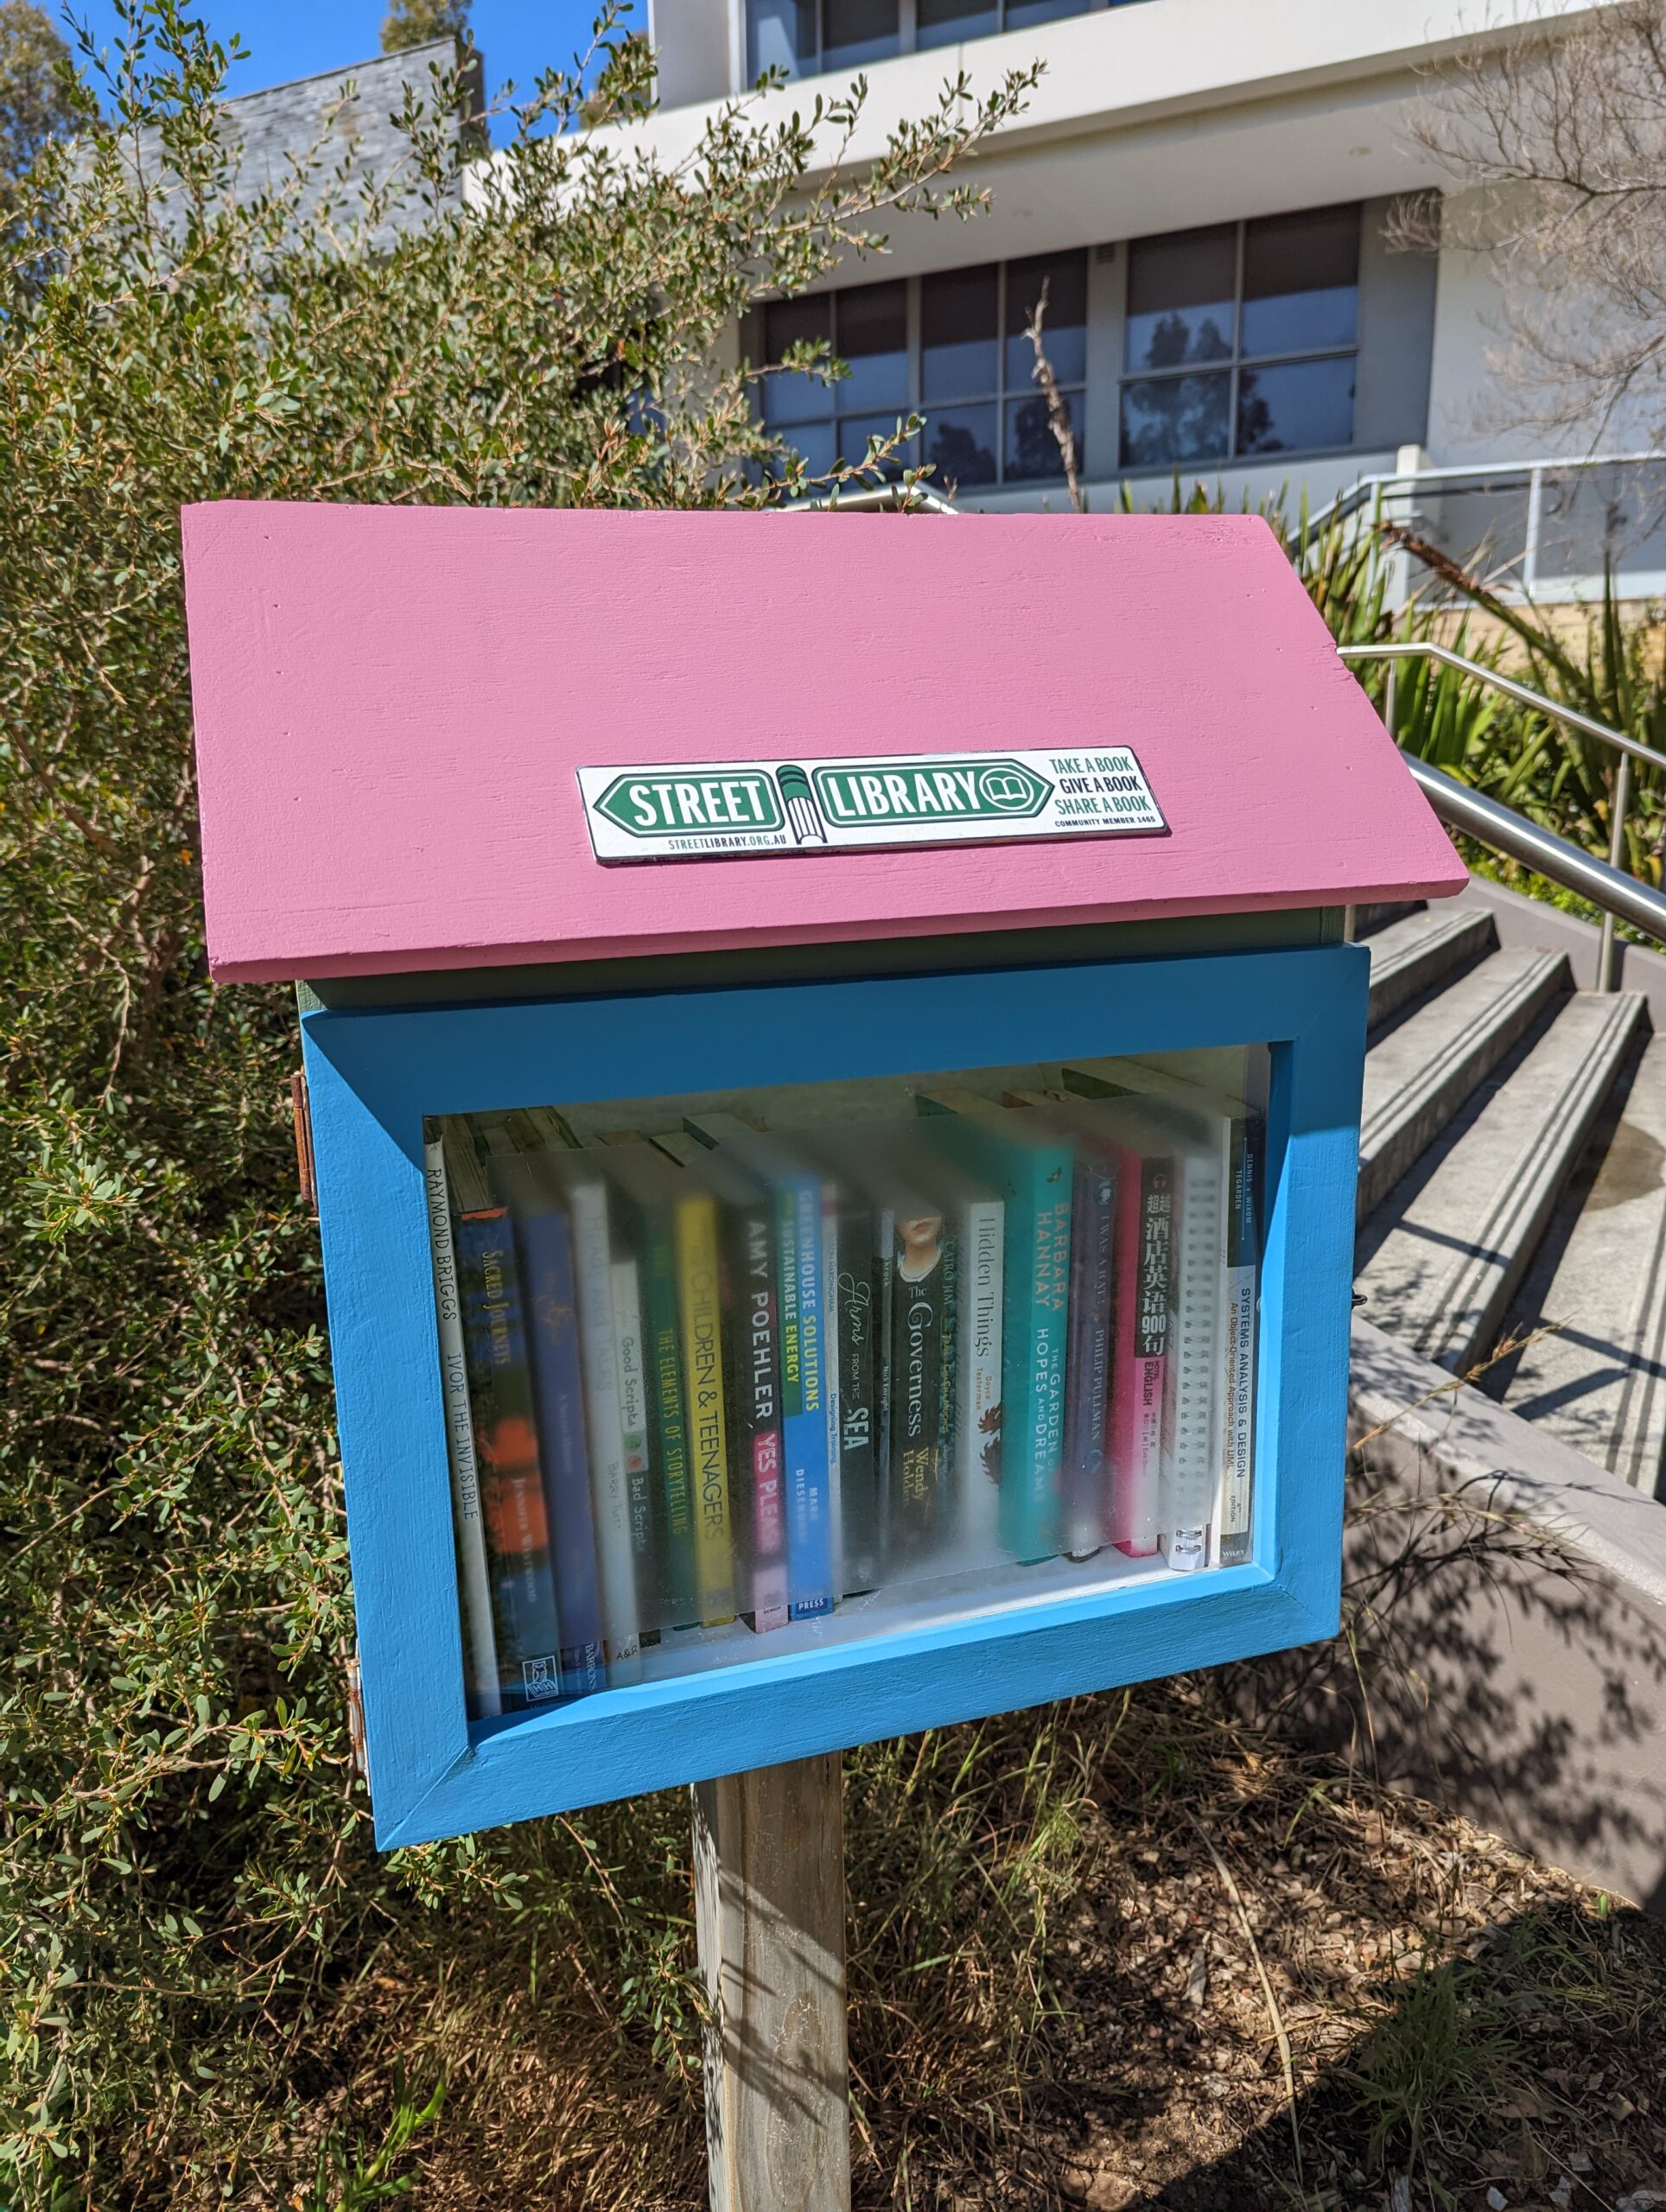 A Street Library with a pink roof and blue body.